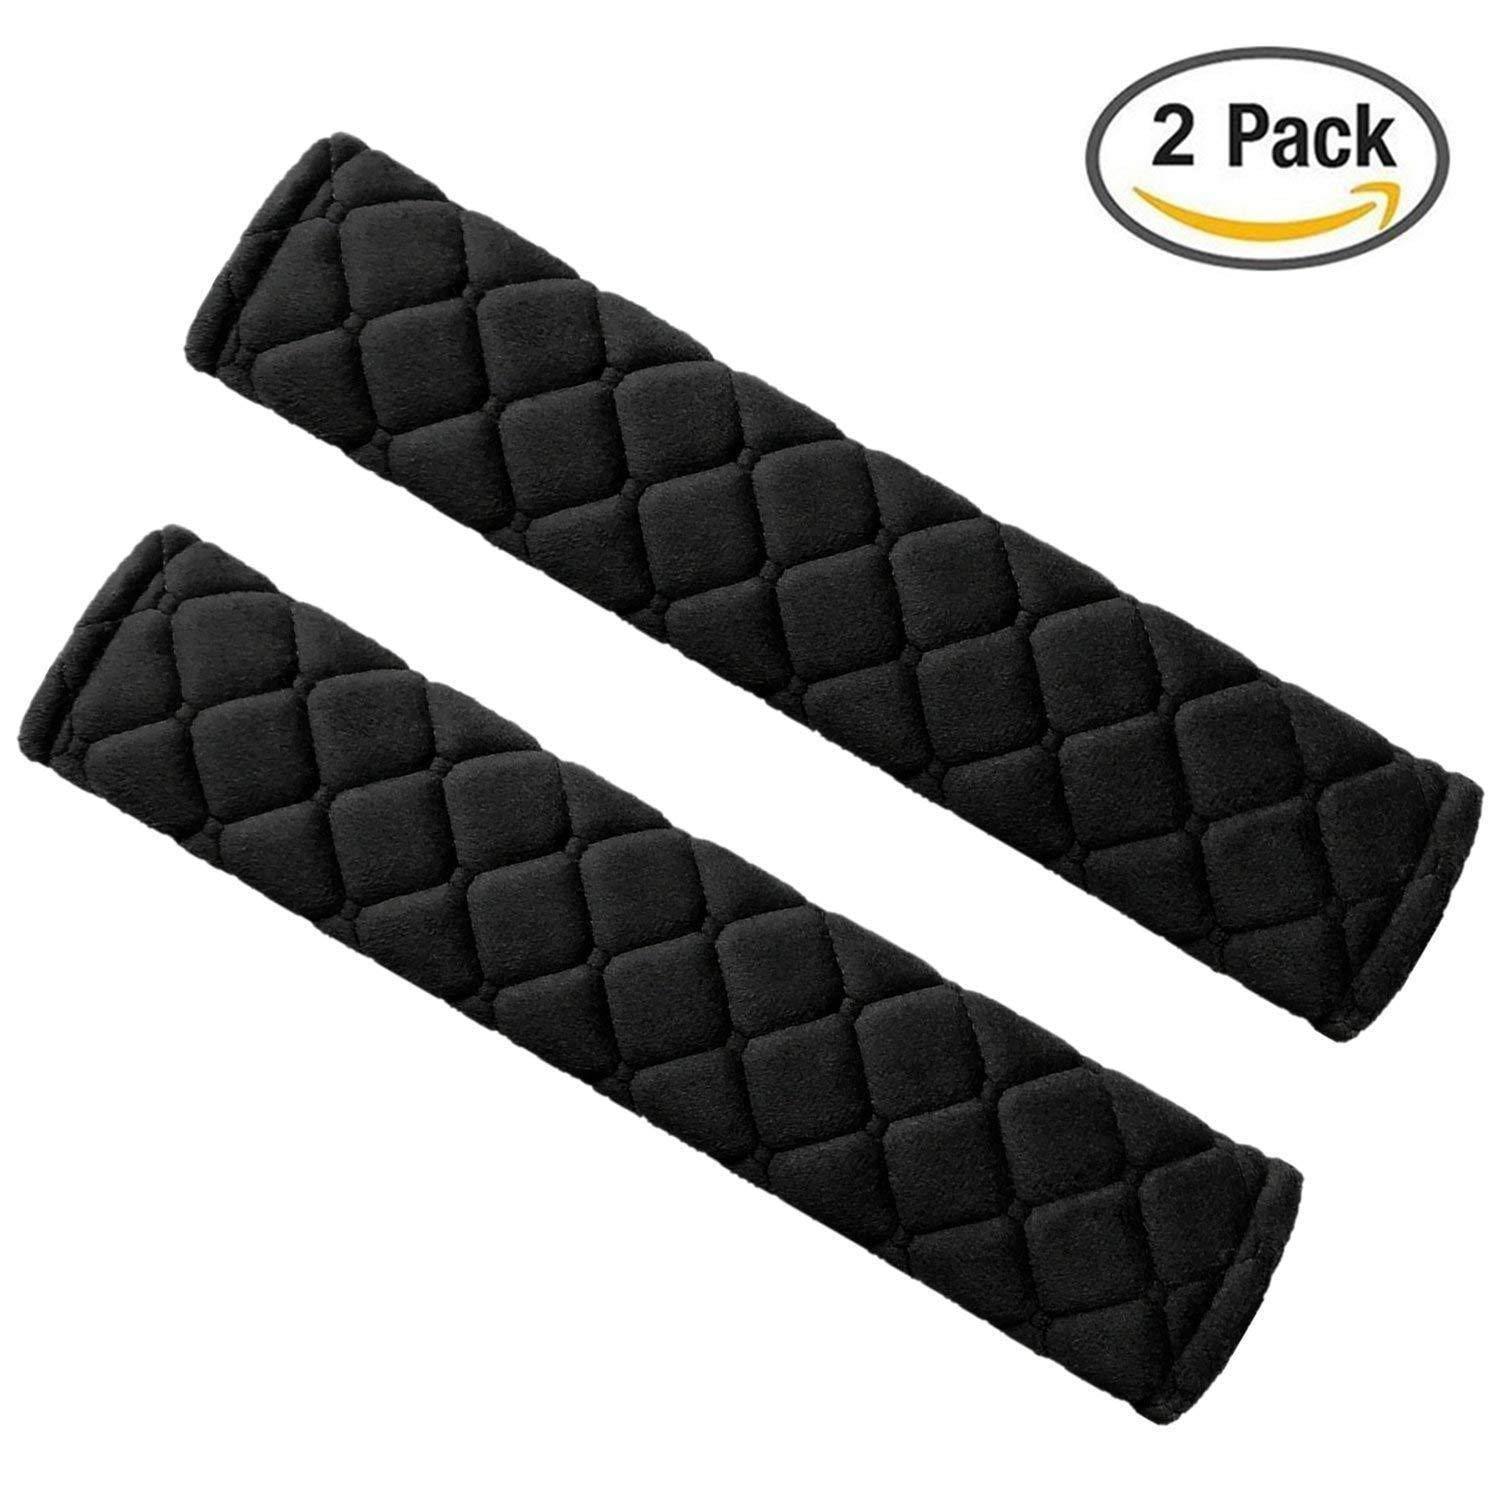 GOSTONG 2-Pack White Mini Daisy Pattern Universal Car Seat Belt Pads Cover,Shoulder Strap Pad Covers for Car Seat Belt/Backpack Soft Comfy Padding Protect Your Neck and Shoulder 